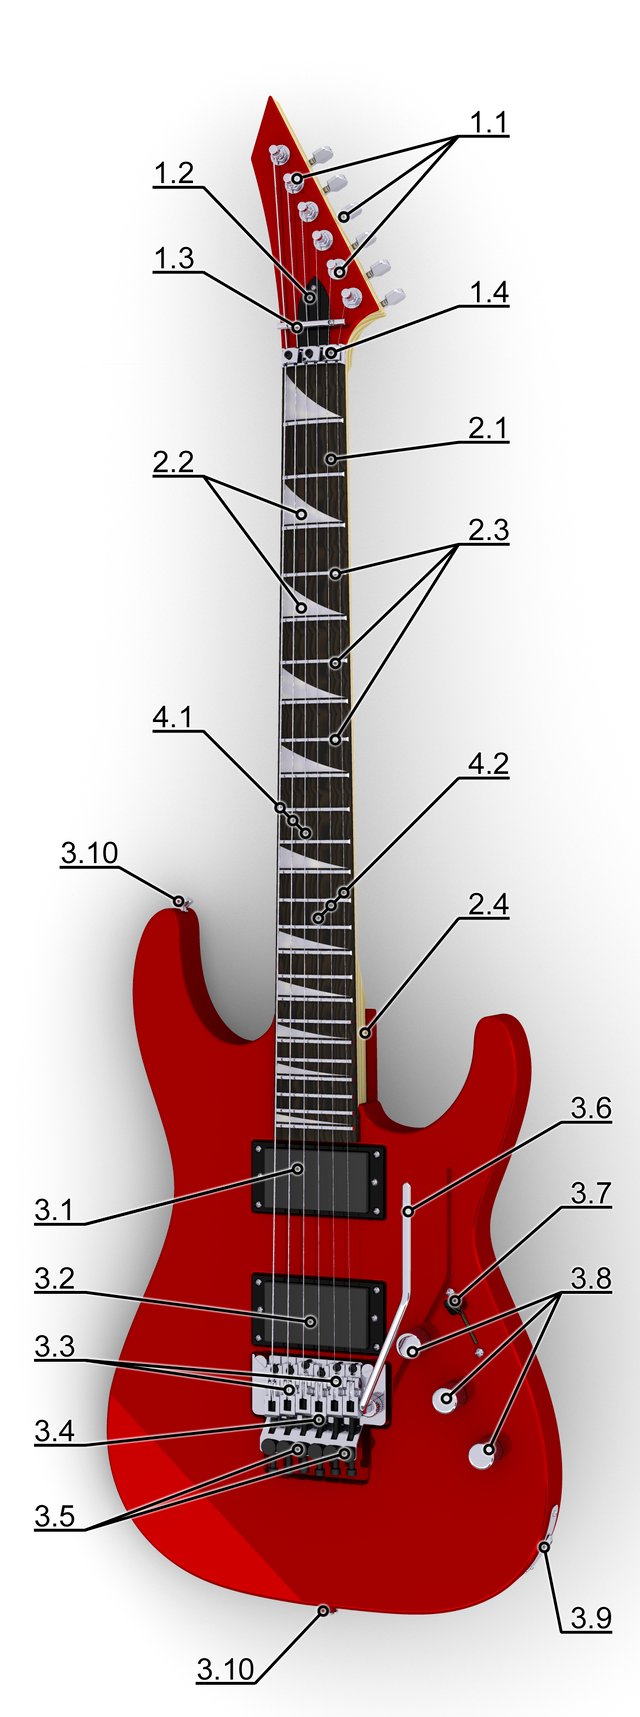 Headstock 1.1 machine heads 1.2 truss rod cover 1.3 string guide 1.4 nut 2. Neck 2.1 fretboard 2.2 inlay fret markers 2.3 frets 2.4 neck joint 3. Body 3.1 "neck" pickup 3.2 "bridge" pickup 3.3 saddles 3.4 bridge 3.5 fine tuners and tailpiece assembly 3.6 whammy bar (vibrato arm) 3.7 pickup selector switch 3.8 volume and tone control knobs 3.9 output connector (output jack)(TS) 3.10 strap buttons 4. Strings 4.1 bass strings 4.2 treble strings